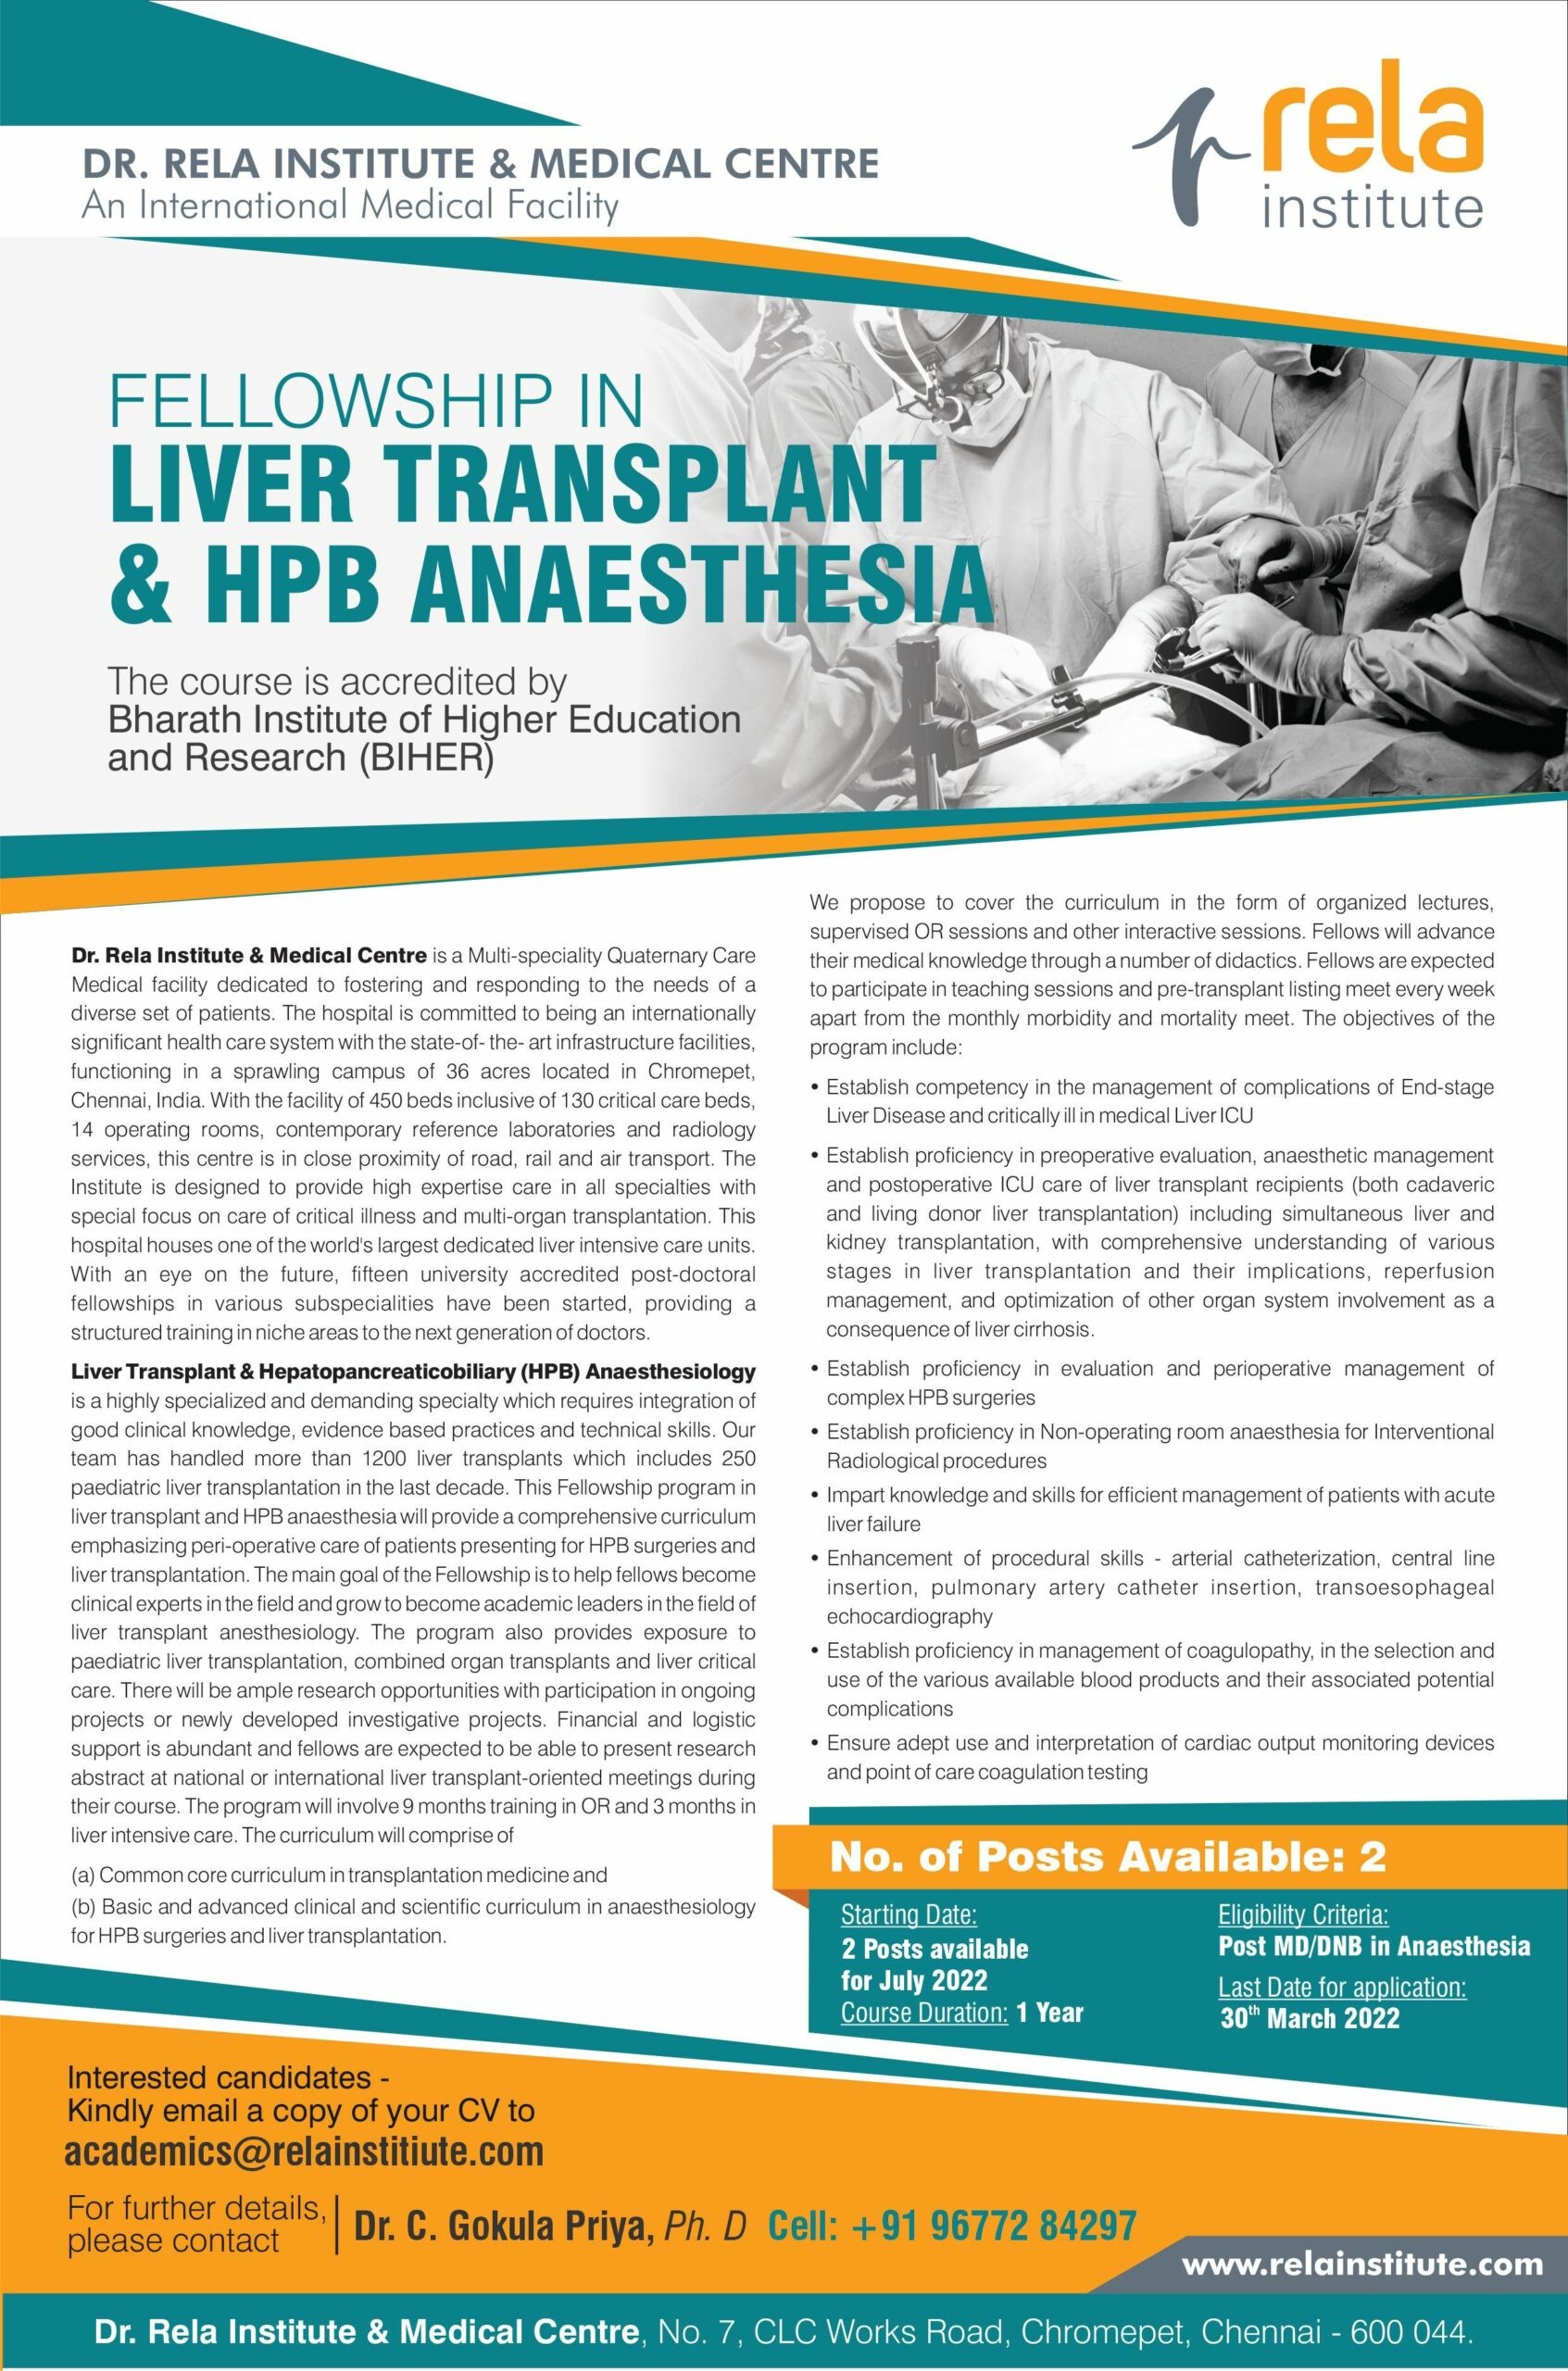 Fellowship in Liver Transplant & HPB Anaesthesia